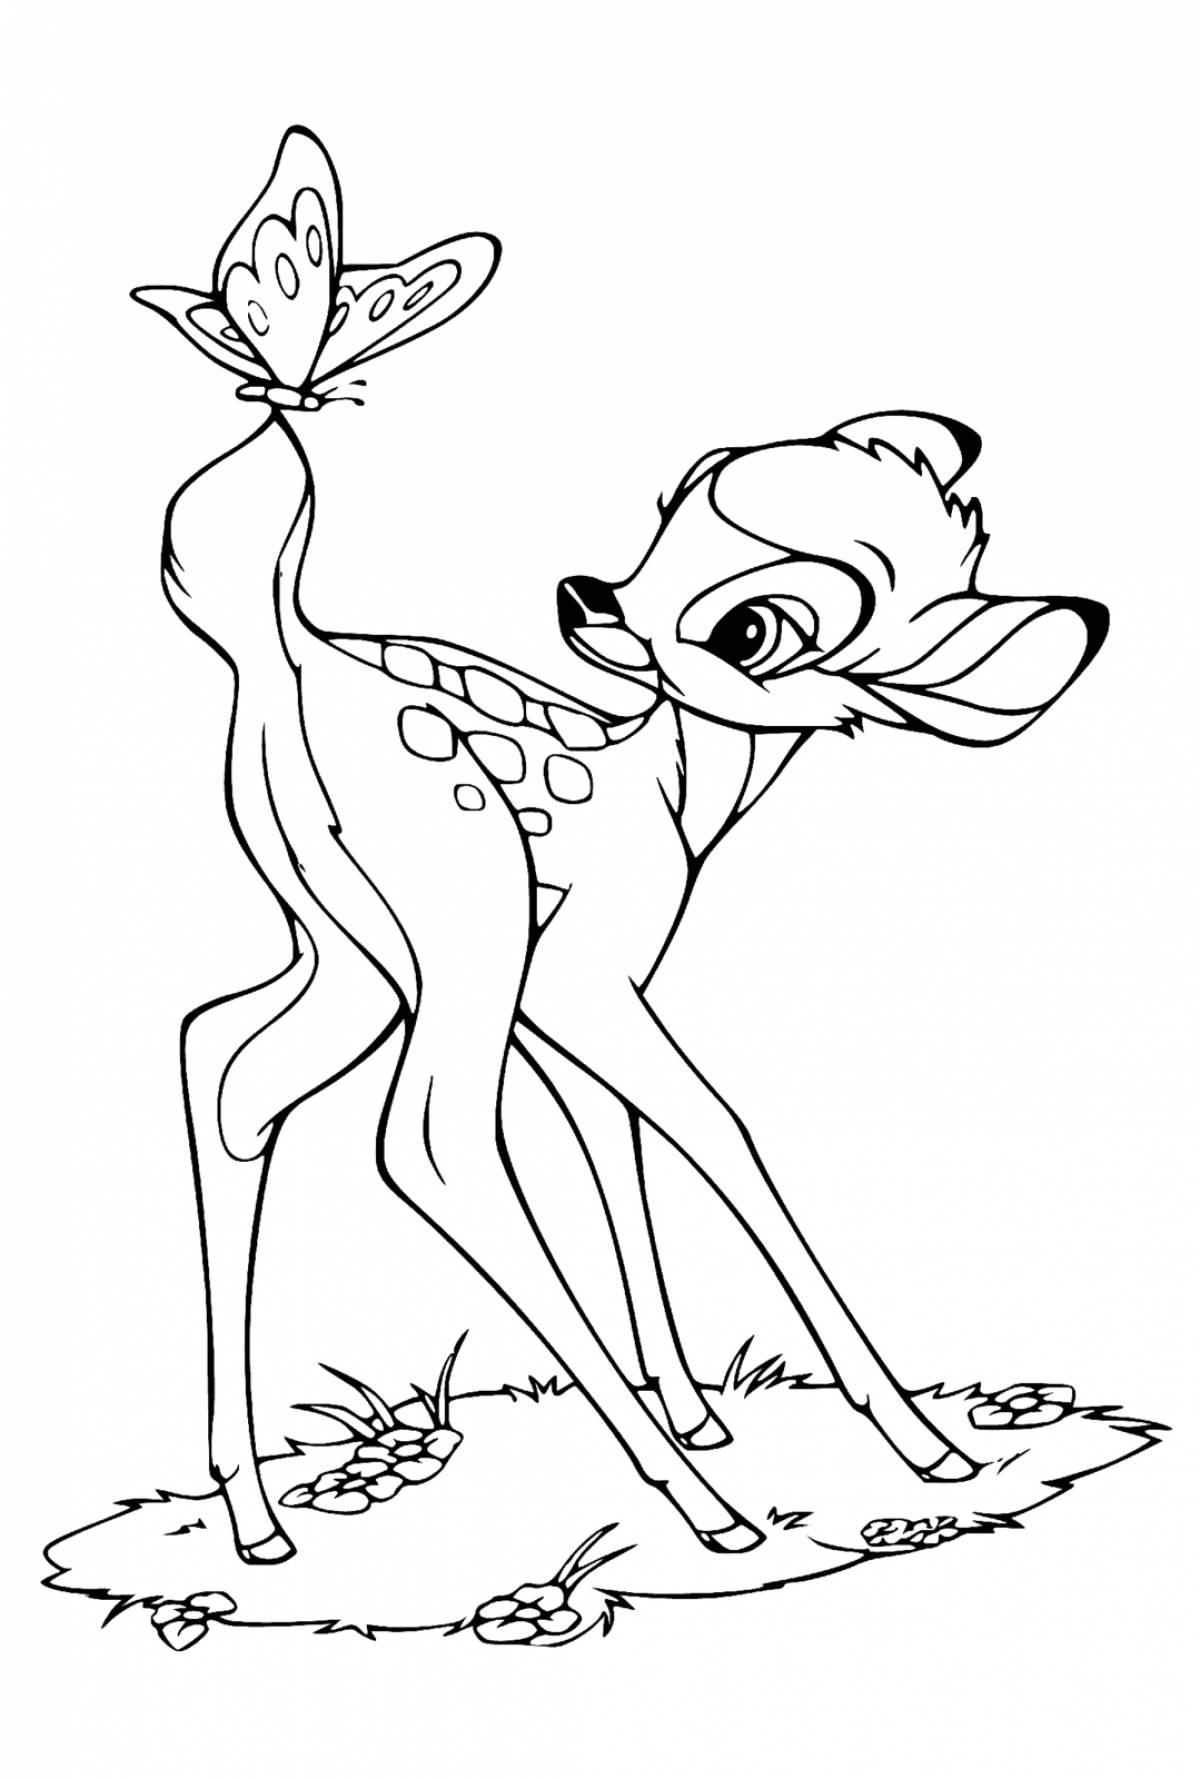 Grand bambi coloring book for 3-4 year olds